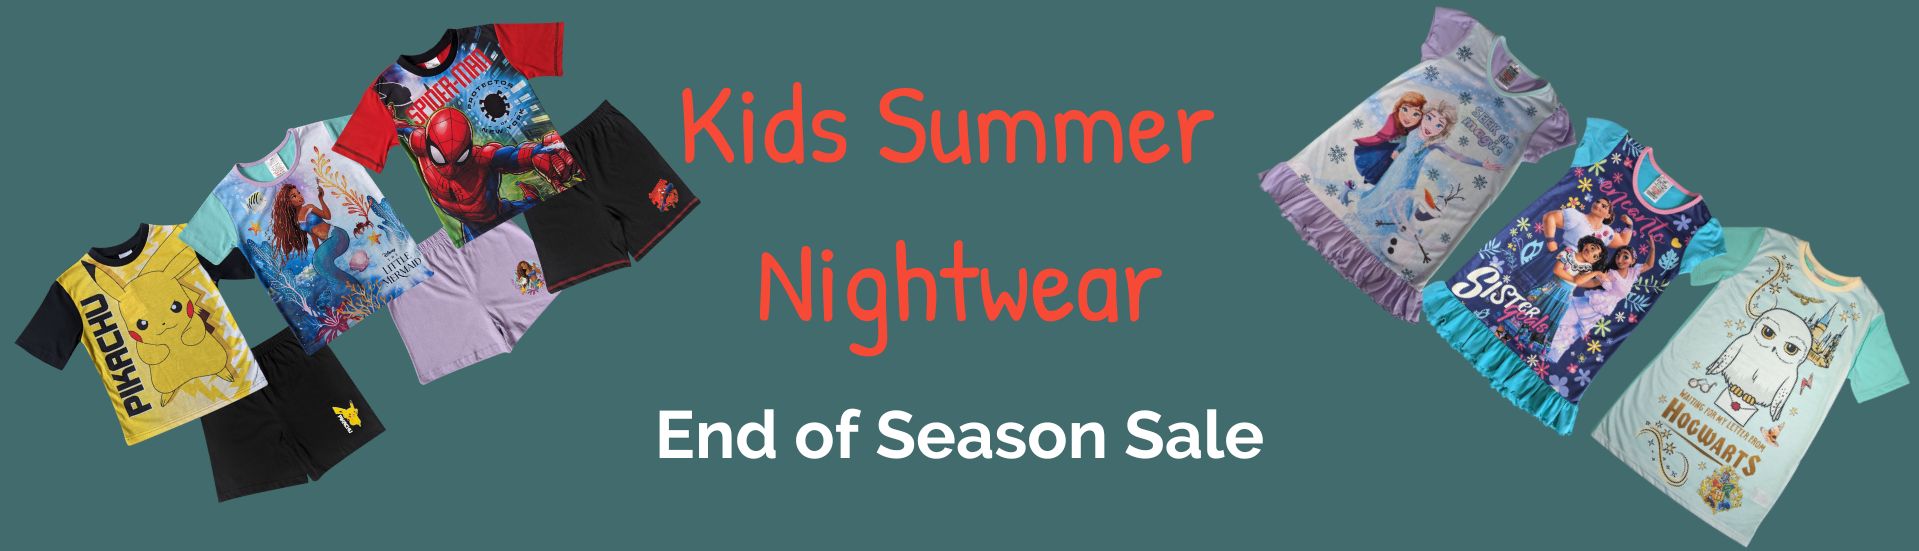 Image featuring childern&#39;s shortie pyjamas and nightdresses that are featured in the end of season sale